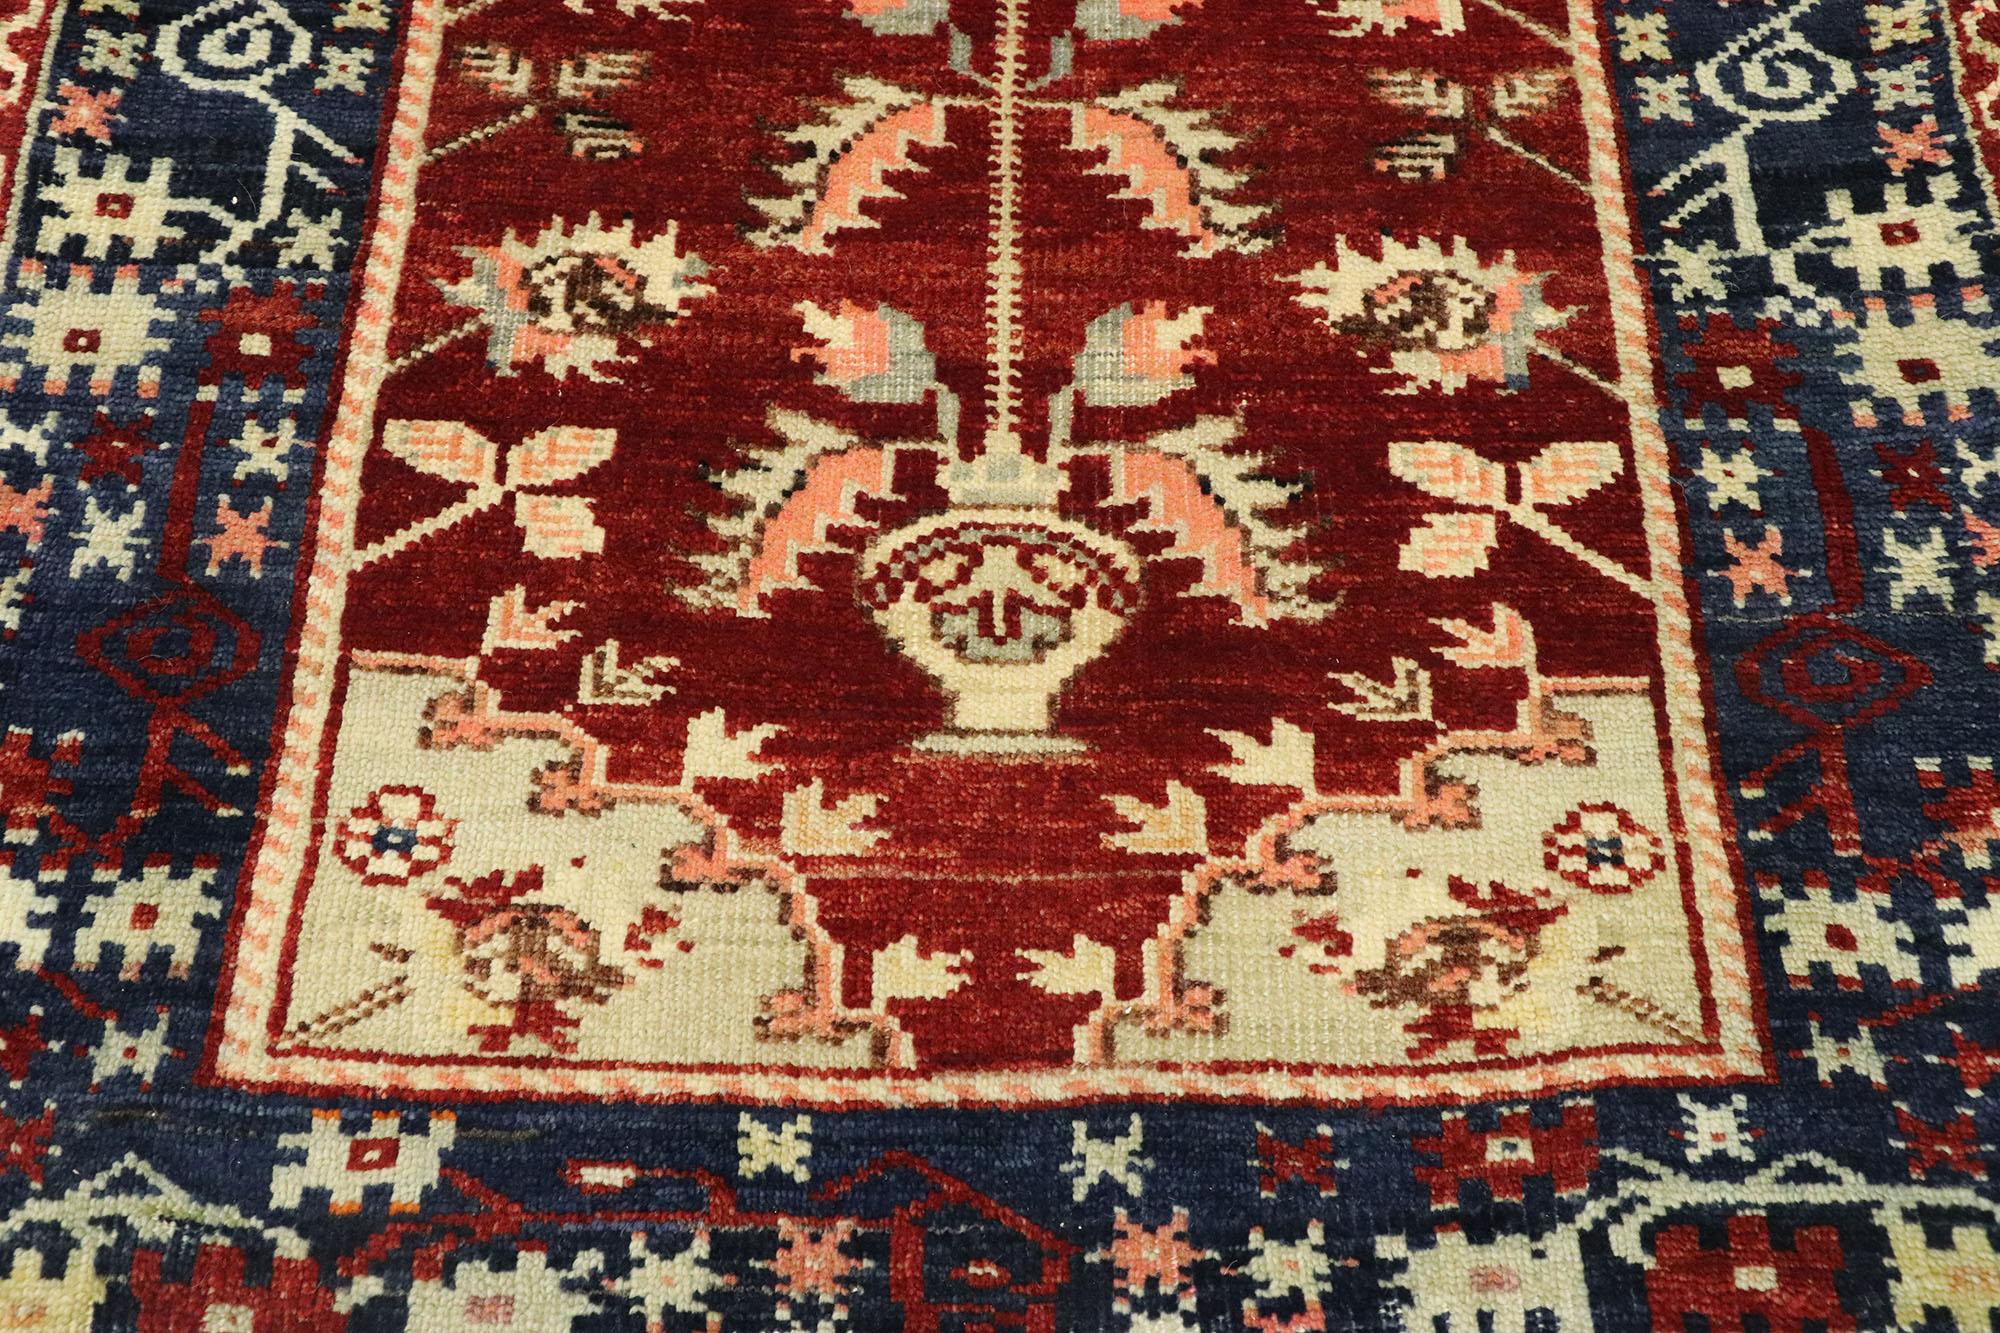 Vintage Turkish Oushak Directional Prayer Rug with Modern Jacobean Style In Good Condition For Sale In Dallas, TX